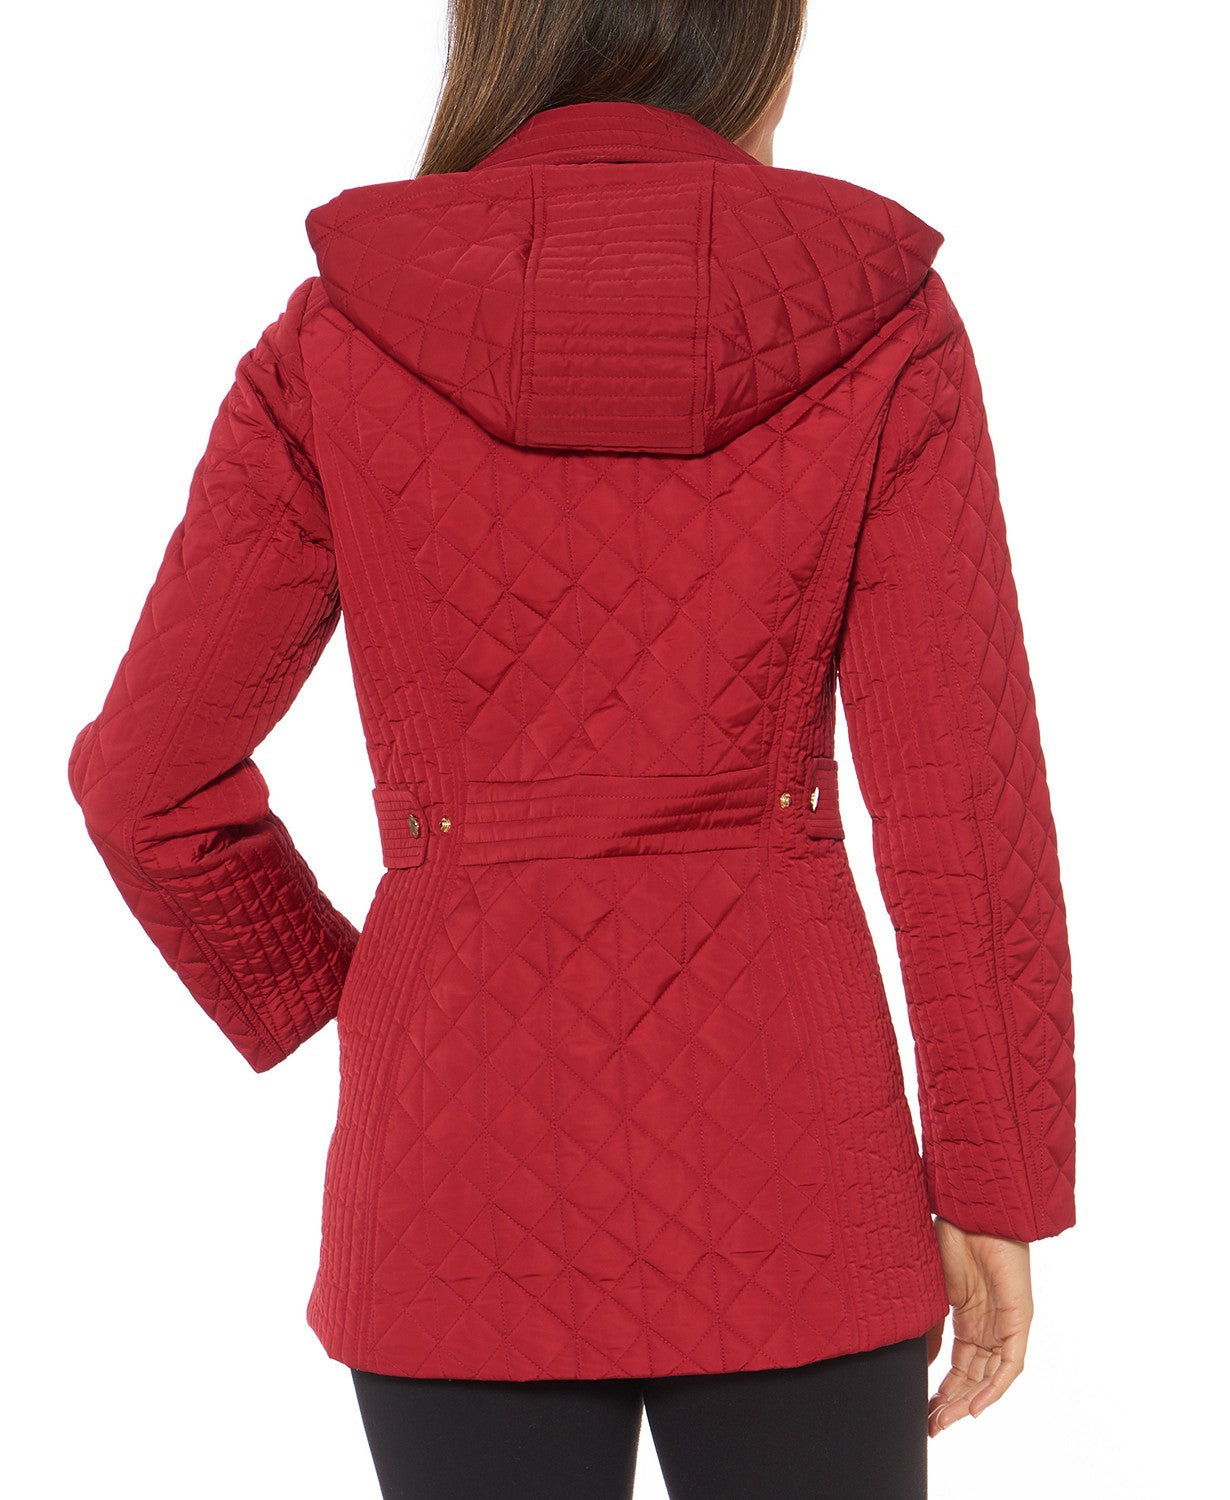 Jones New York Womens Hooded Quilted Jacket XS Solid Red